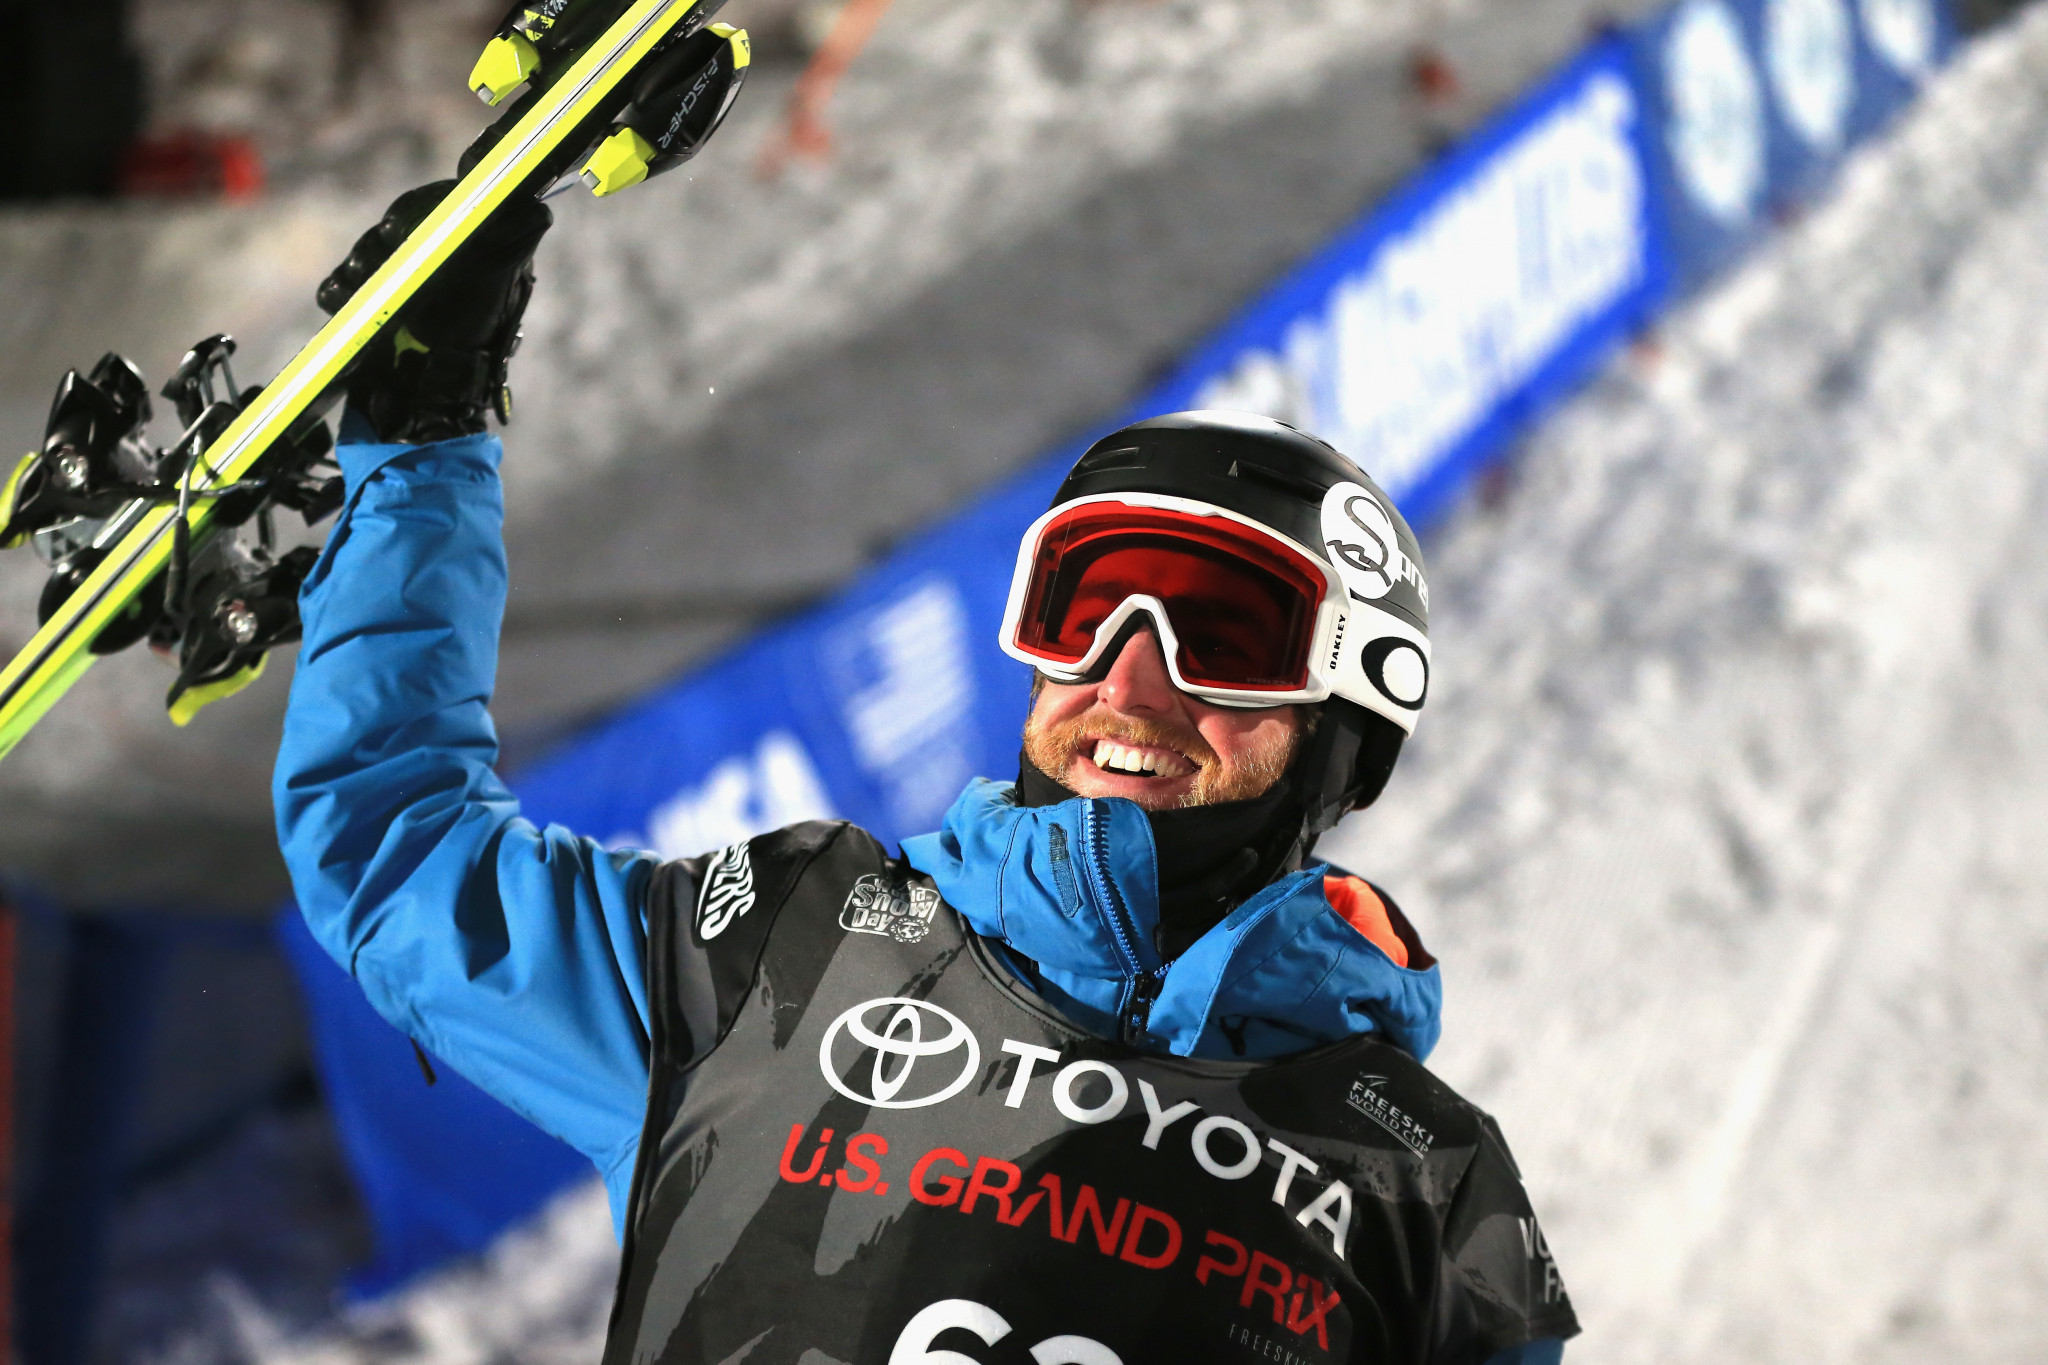 American athletes dominate on home snow at FIS Freestyle Skiing World Cup